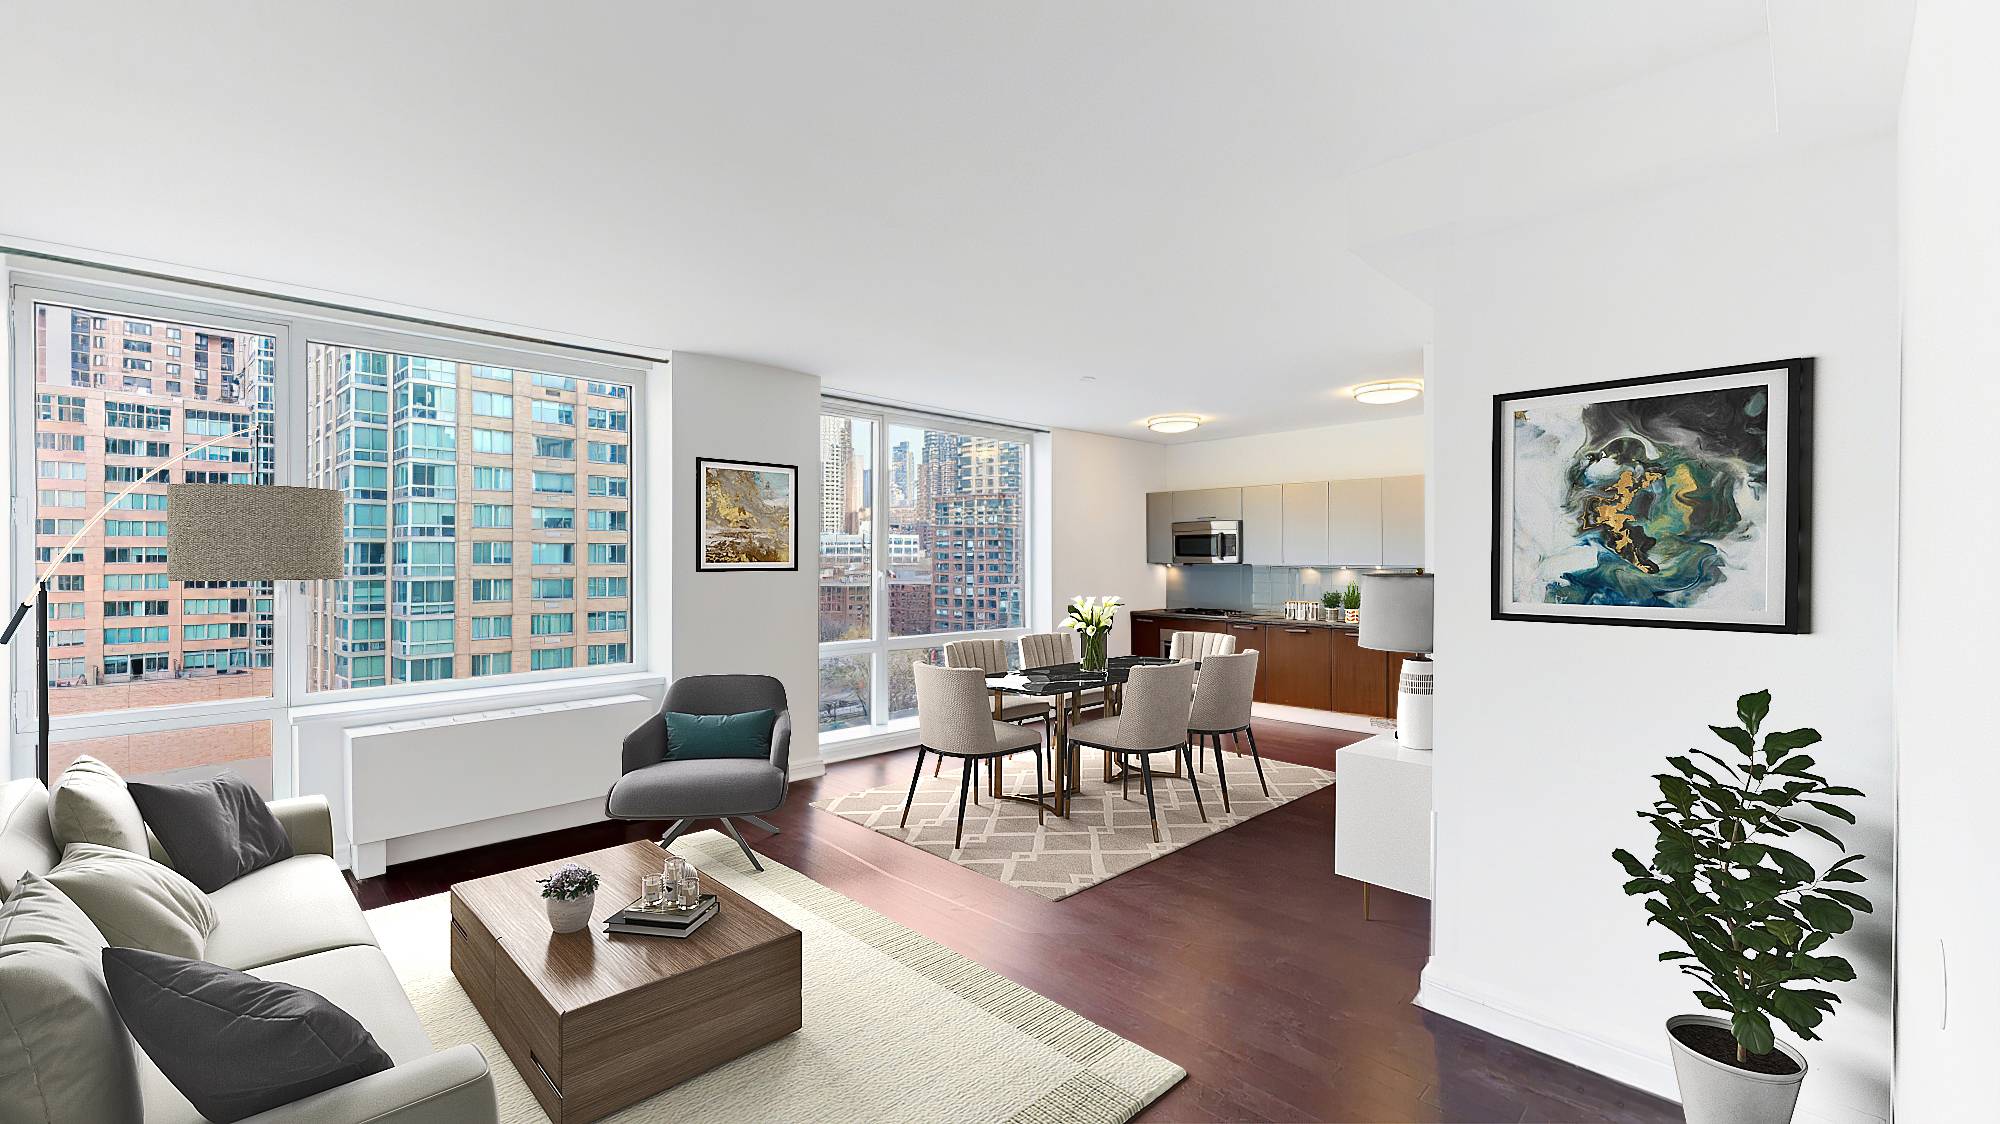 Convertible 2 bedroom. Unit 9A features floor to ceiling windows that provide direct light and open city skyline views across the living and dining areas that are almost 19' wide.